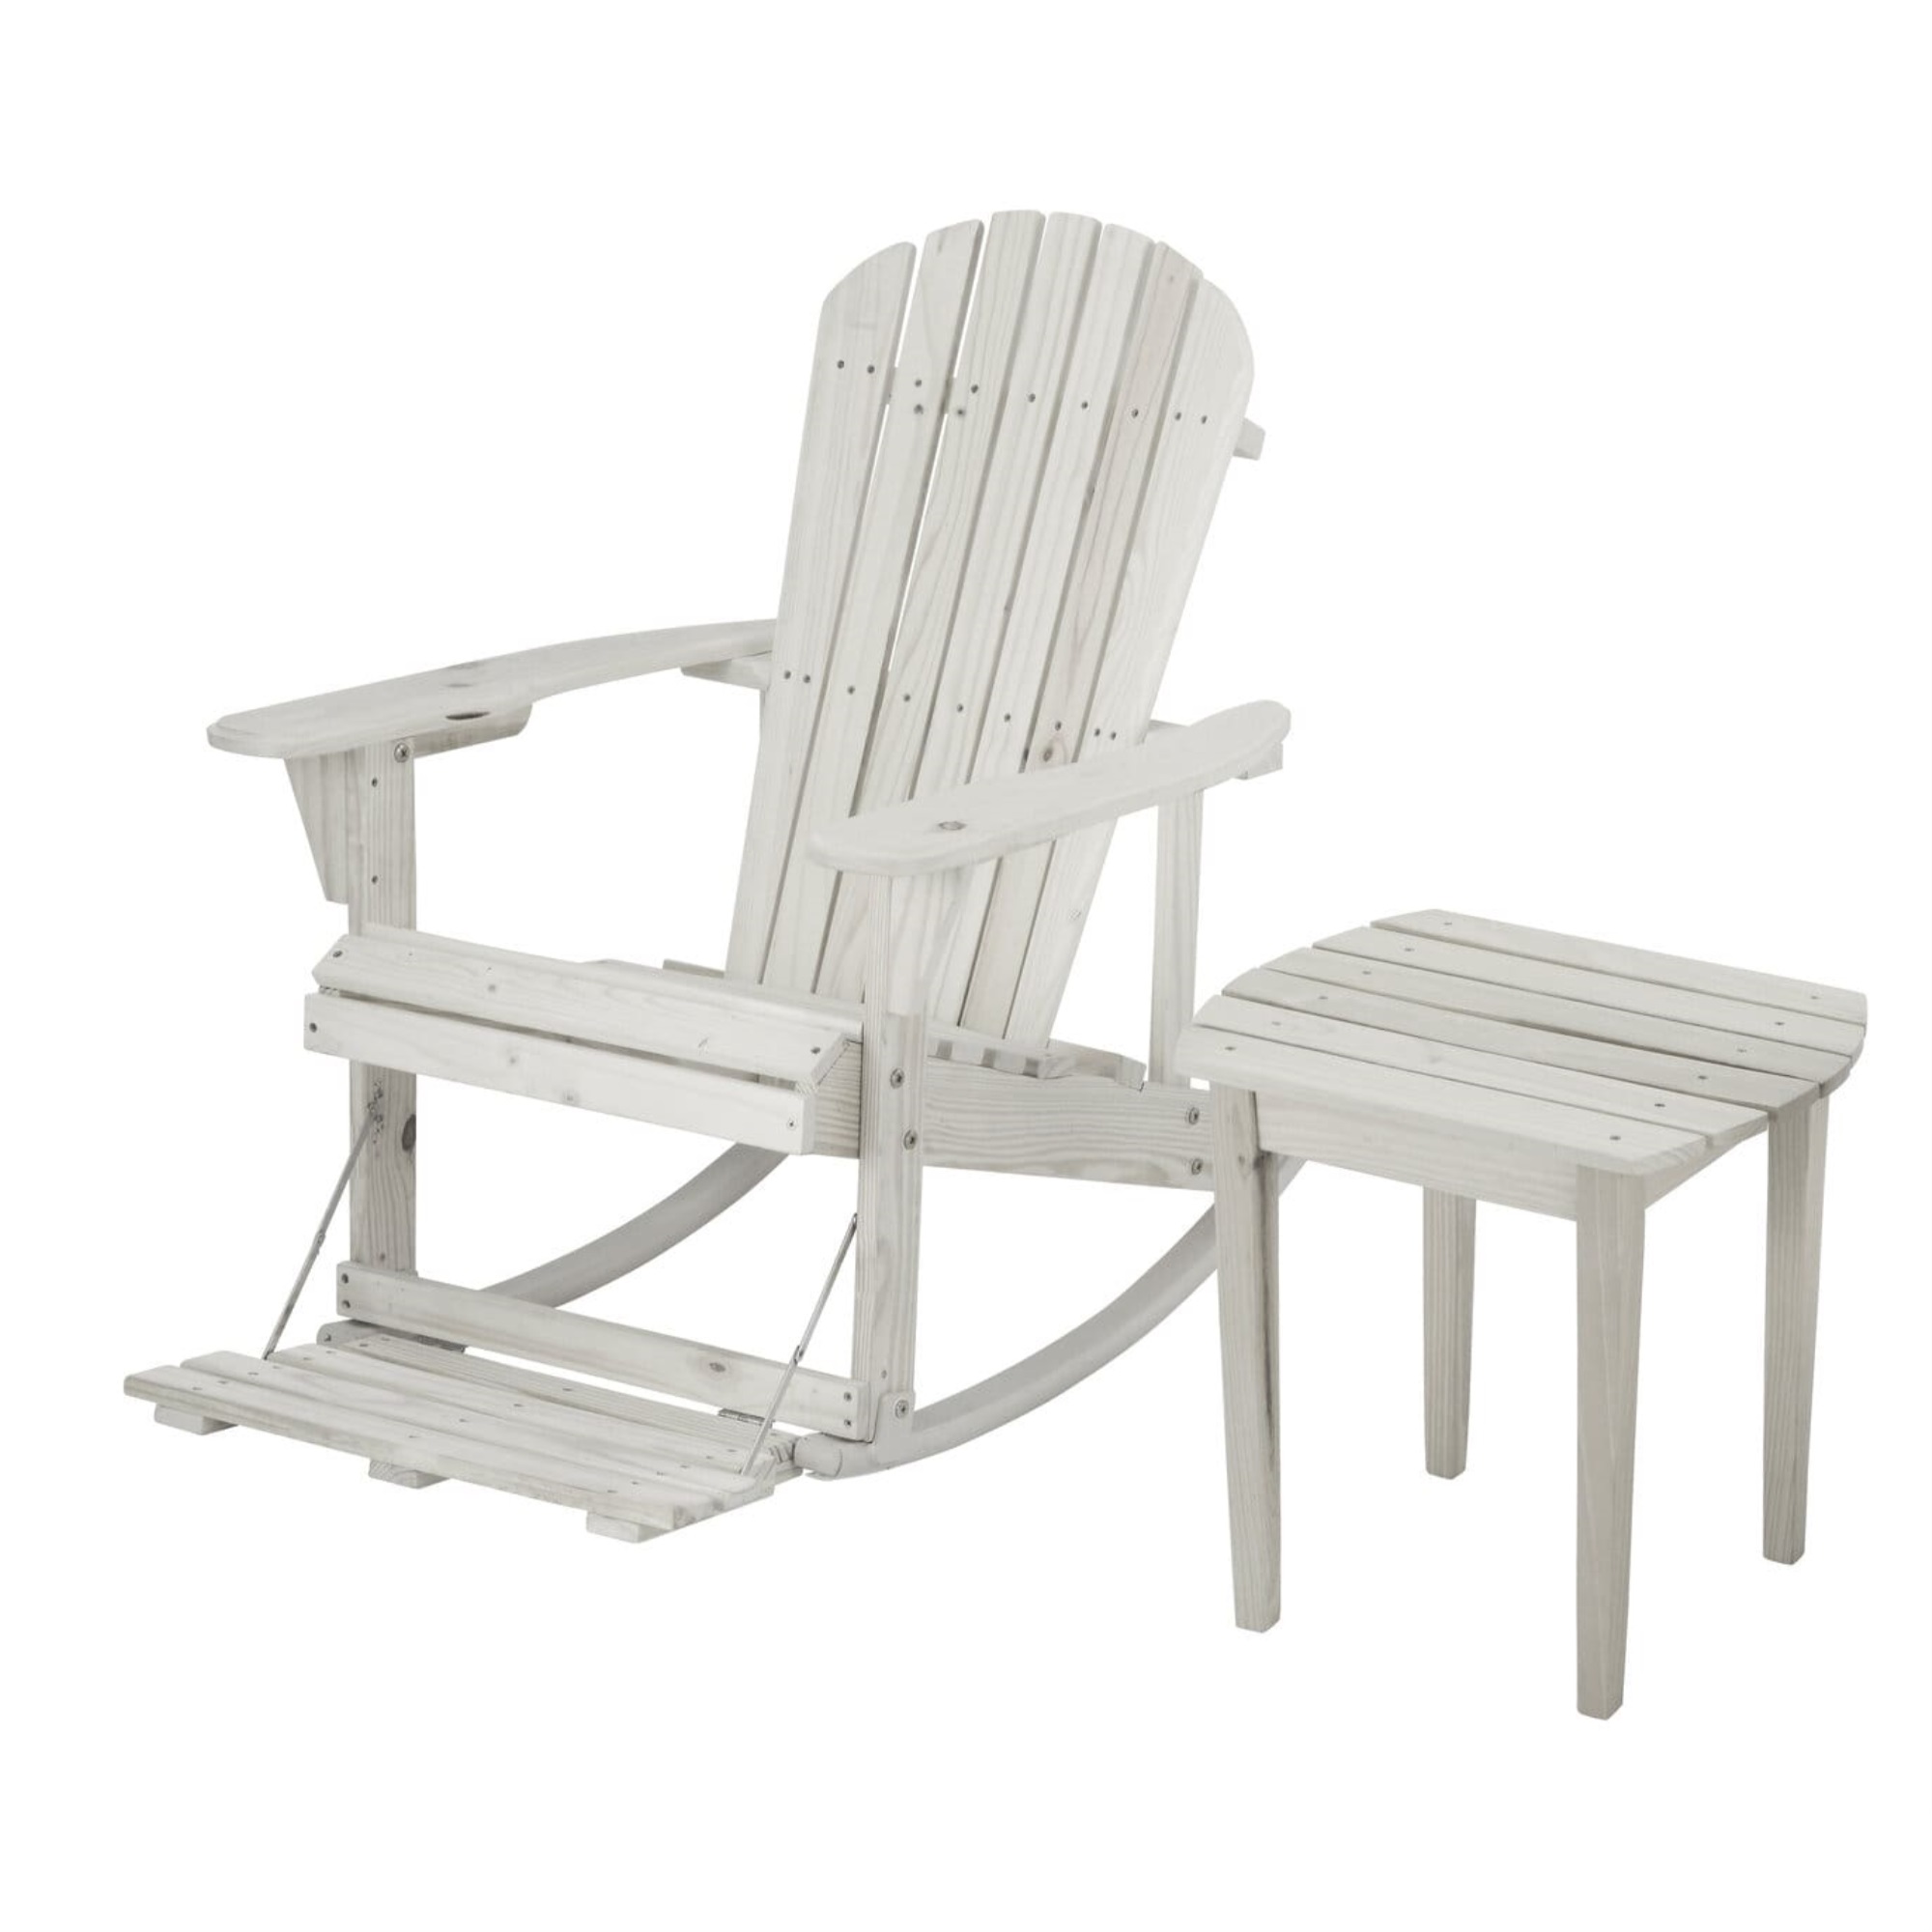 W Unlimited SW2007WT-R1ET1 Zero Gravity Adirondack Rocking Chair with Built-in Footrest, White